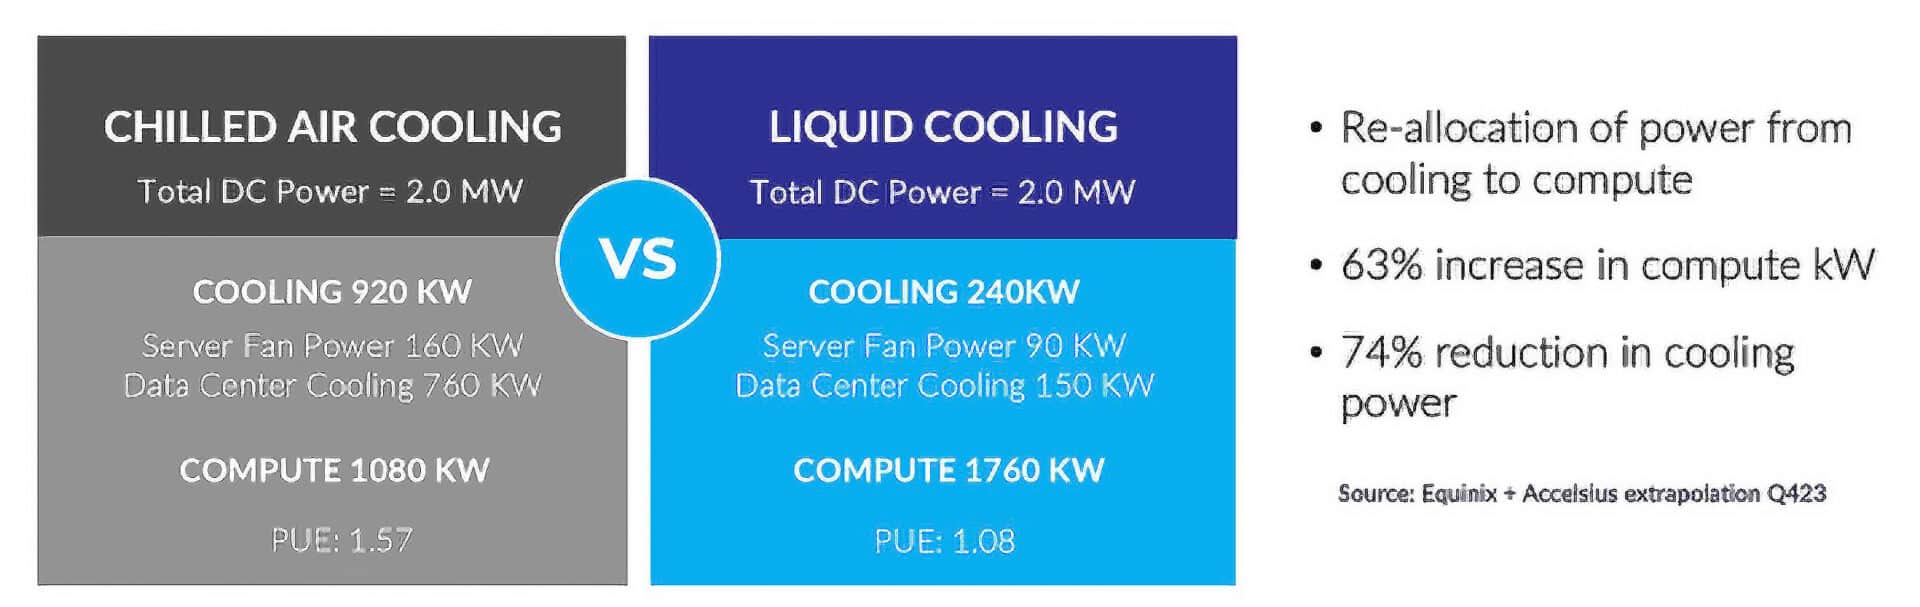 Chilled Air Cooling vs Liquid Cooling